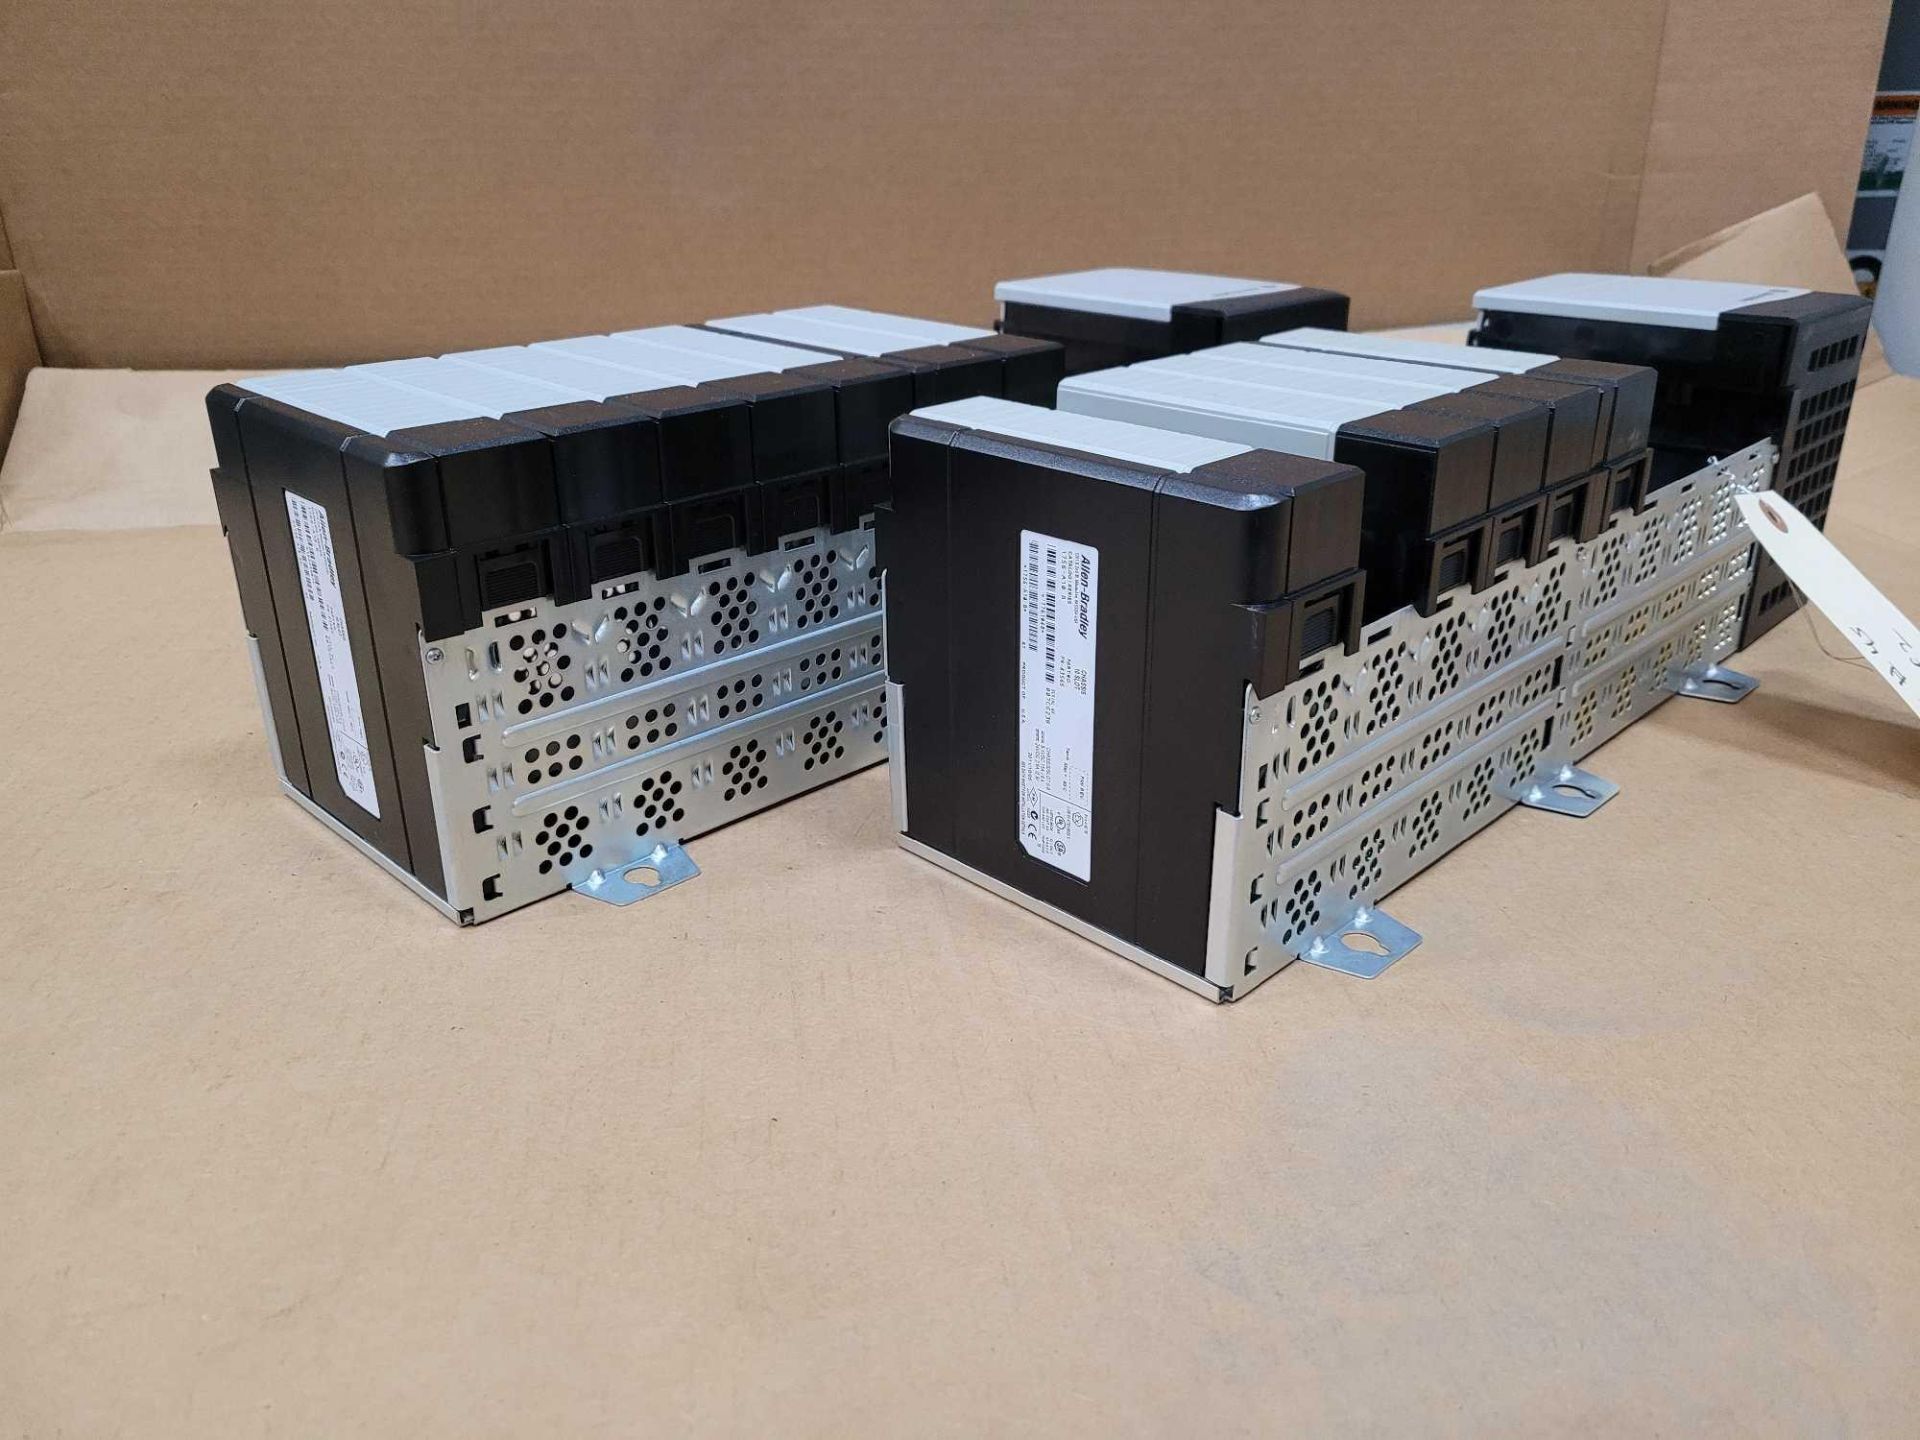 LOT OF 2 ALLEN BRADLEY 1756-PA75 /B AC POWER SUPPLY W/ 1756-A10 /B 10 SLOT CHASSIS - Image 2 of 4